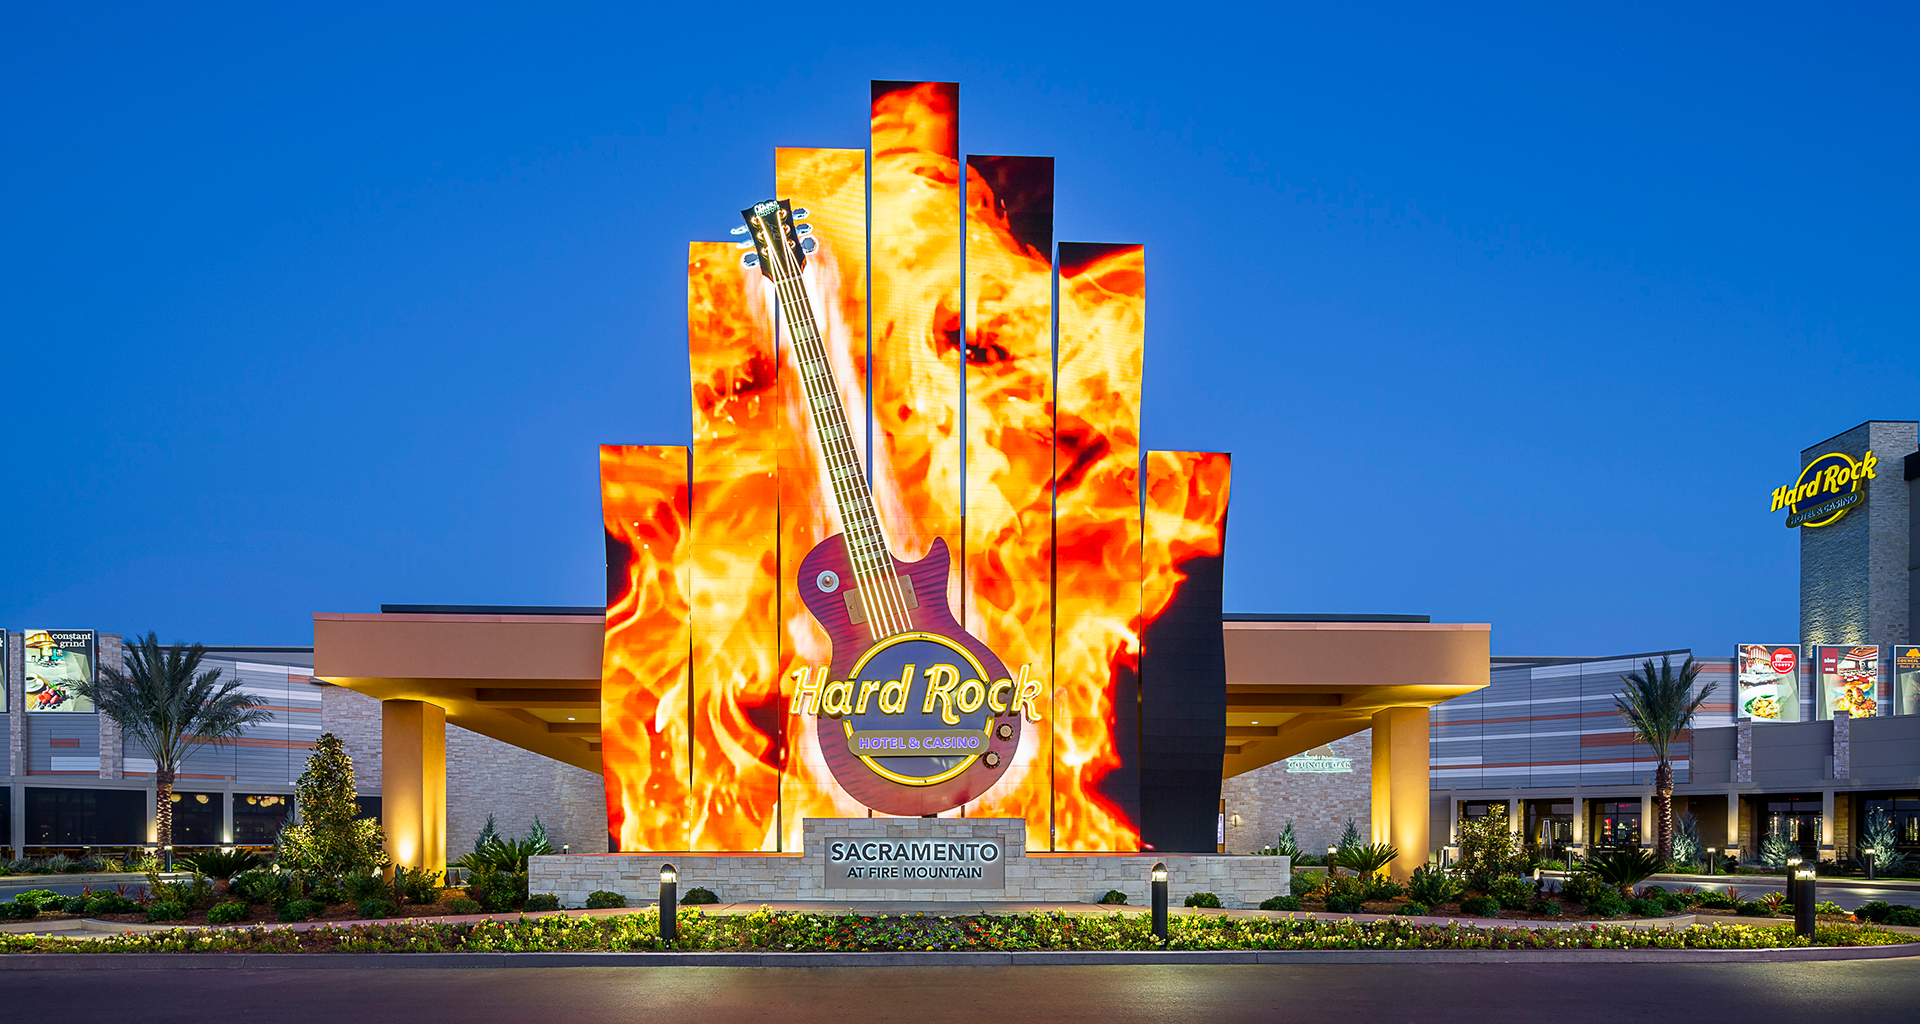 History of Hard Rock: An Introduction to the Brand